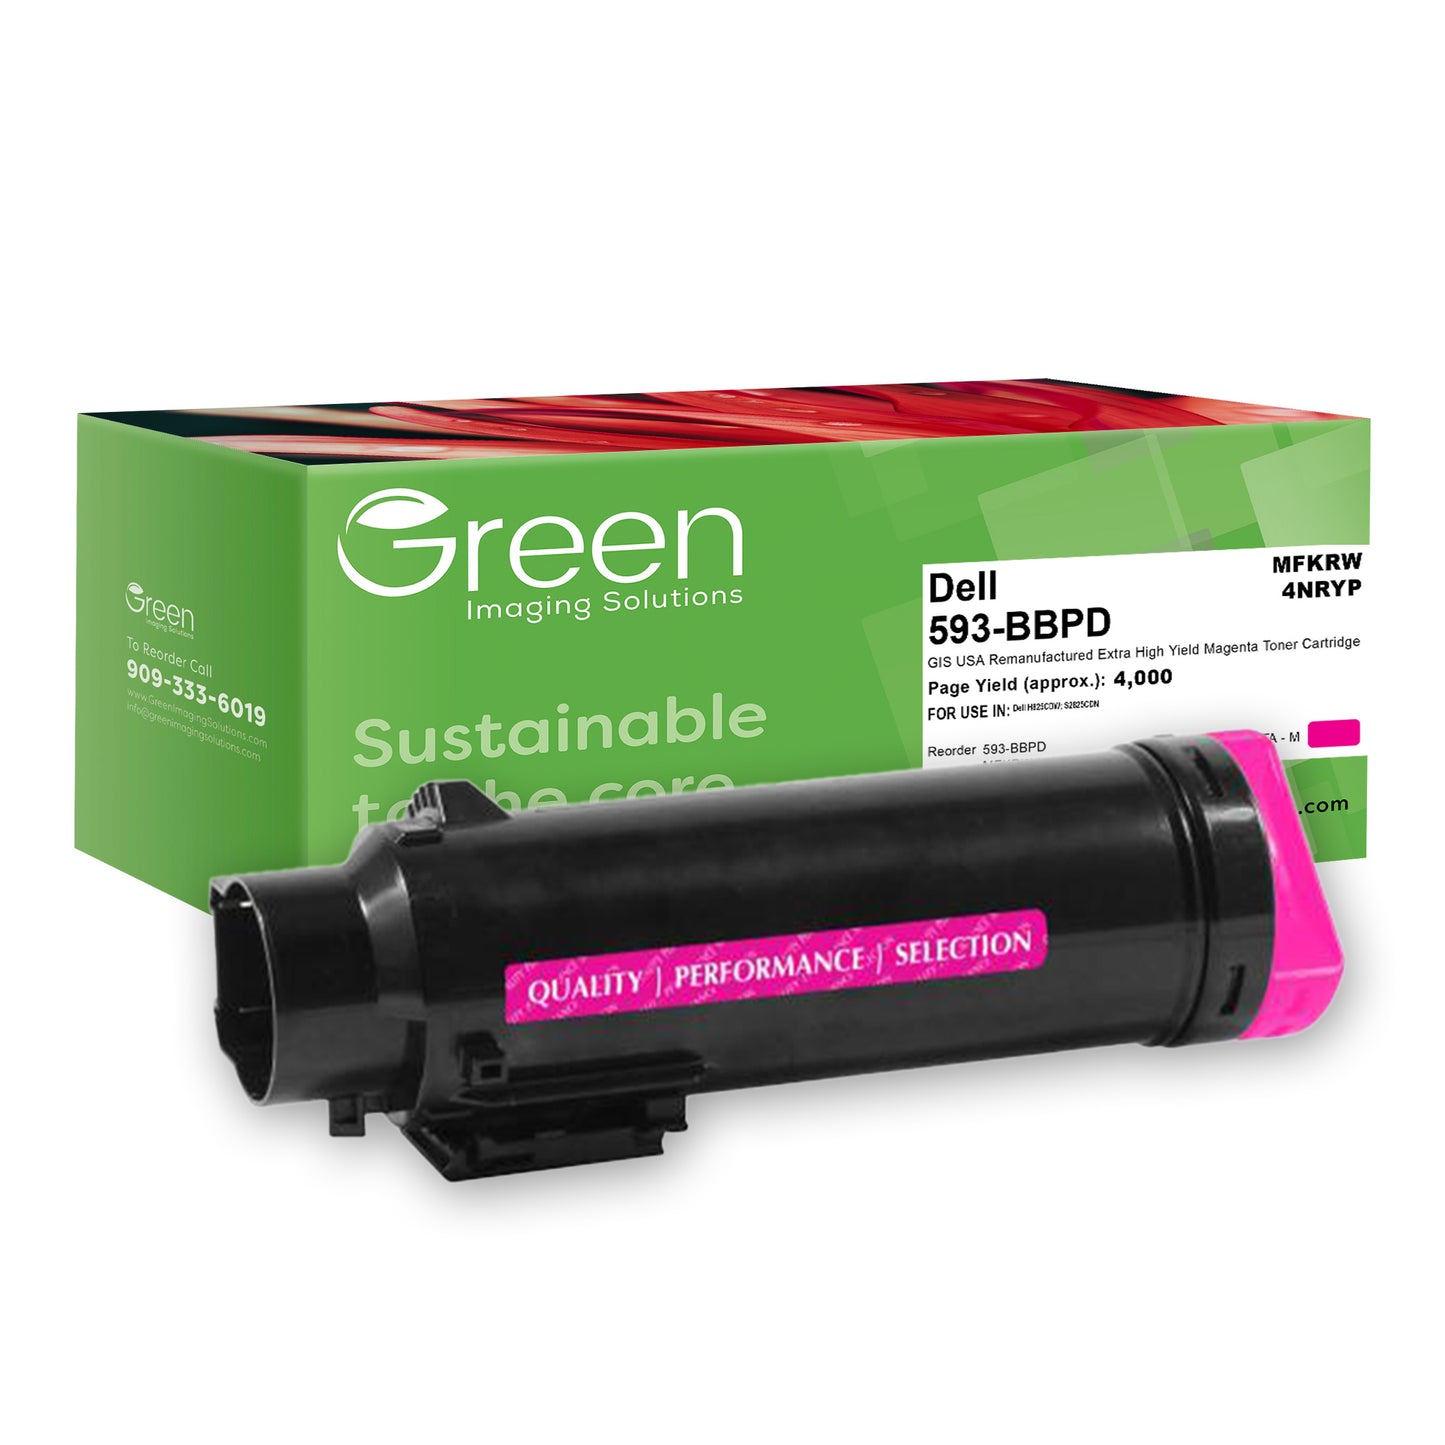 Green Imaging Solutions USA Remanufactured Extra High Yield Magenta Toner Cartridge for Dell H825